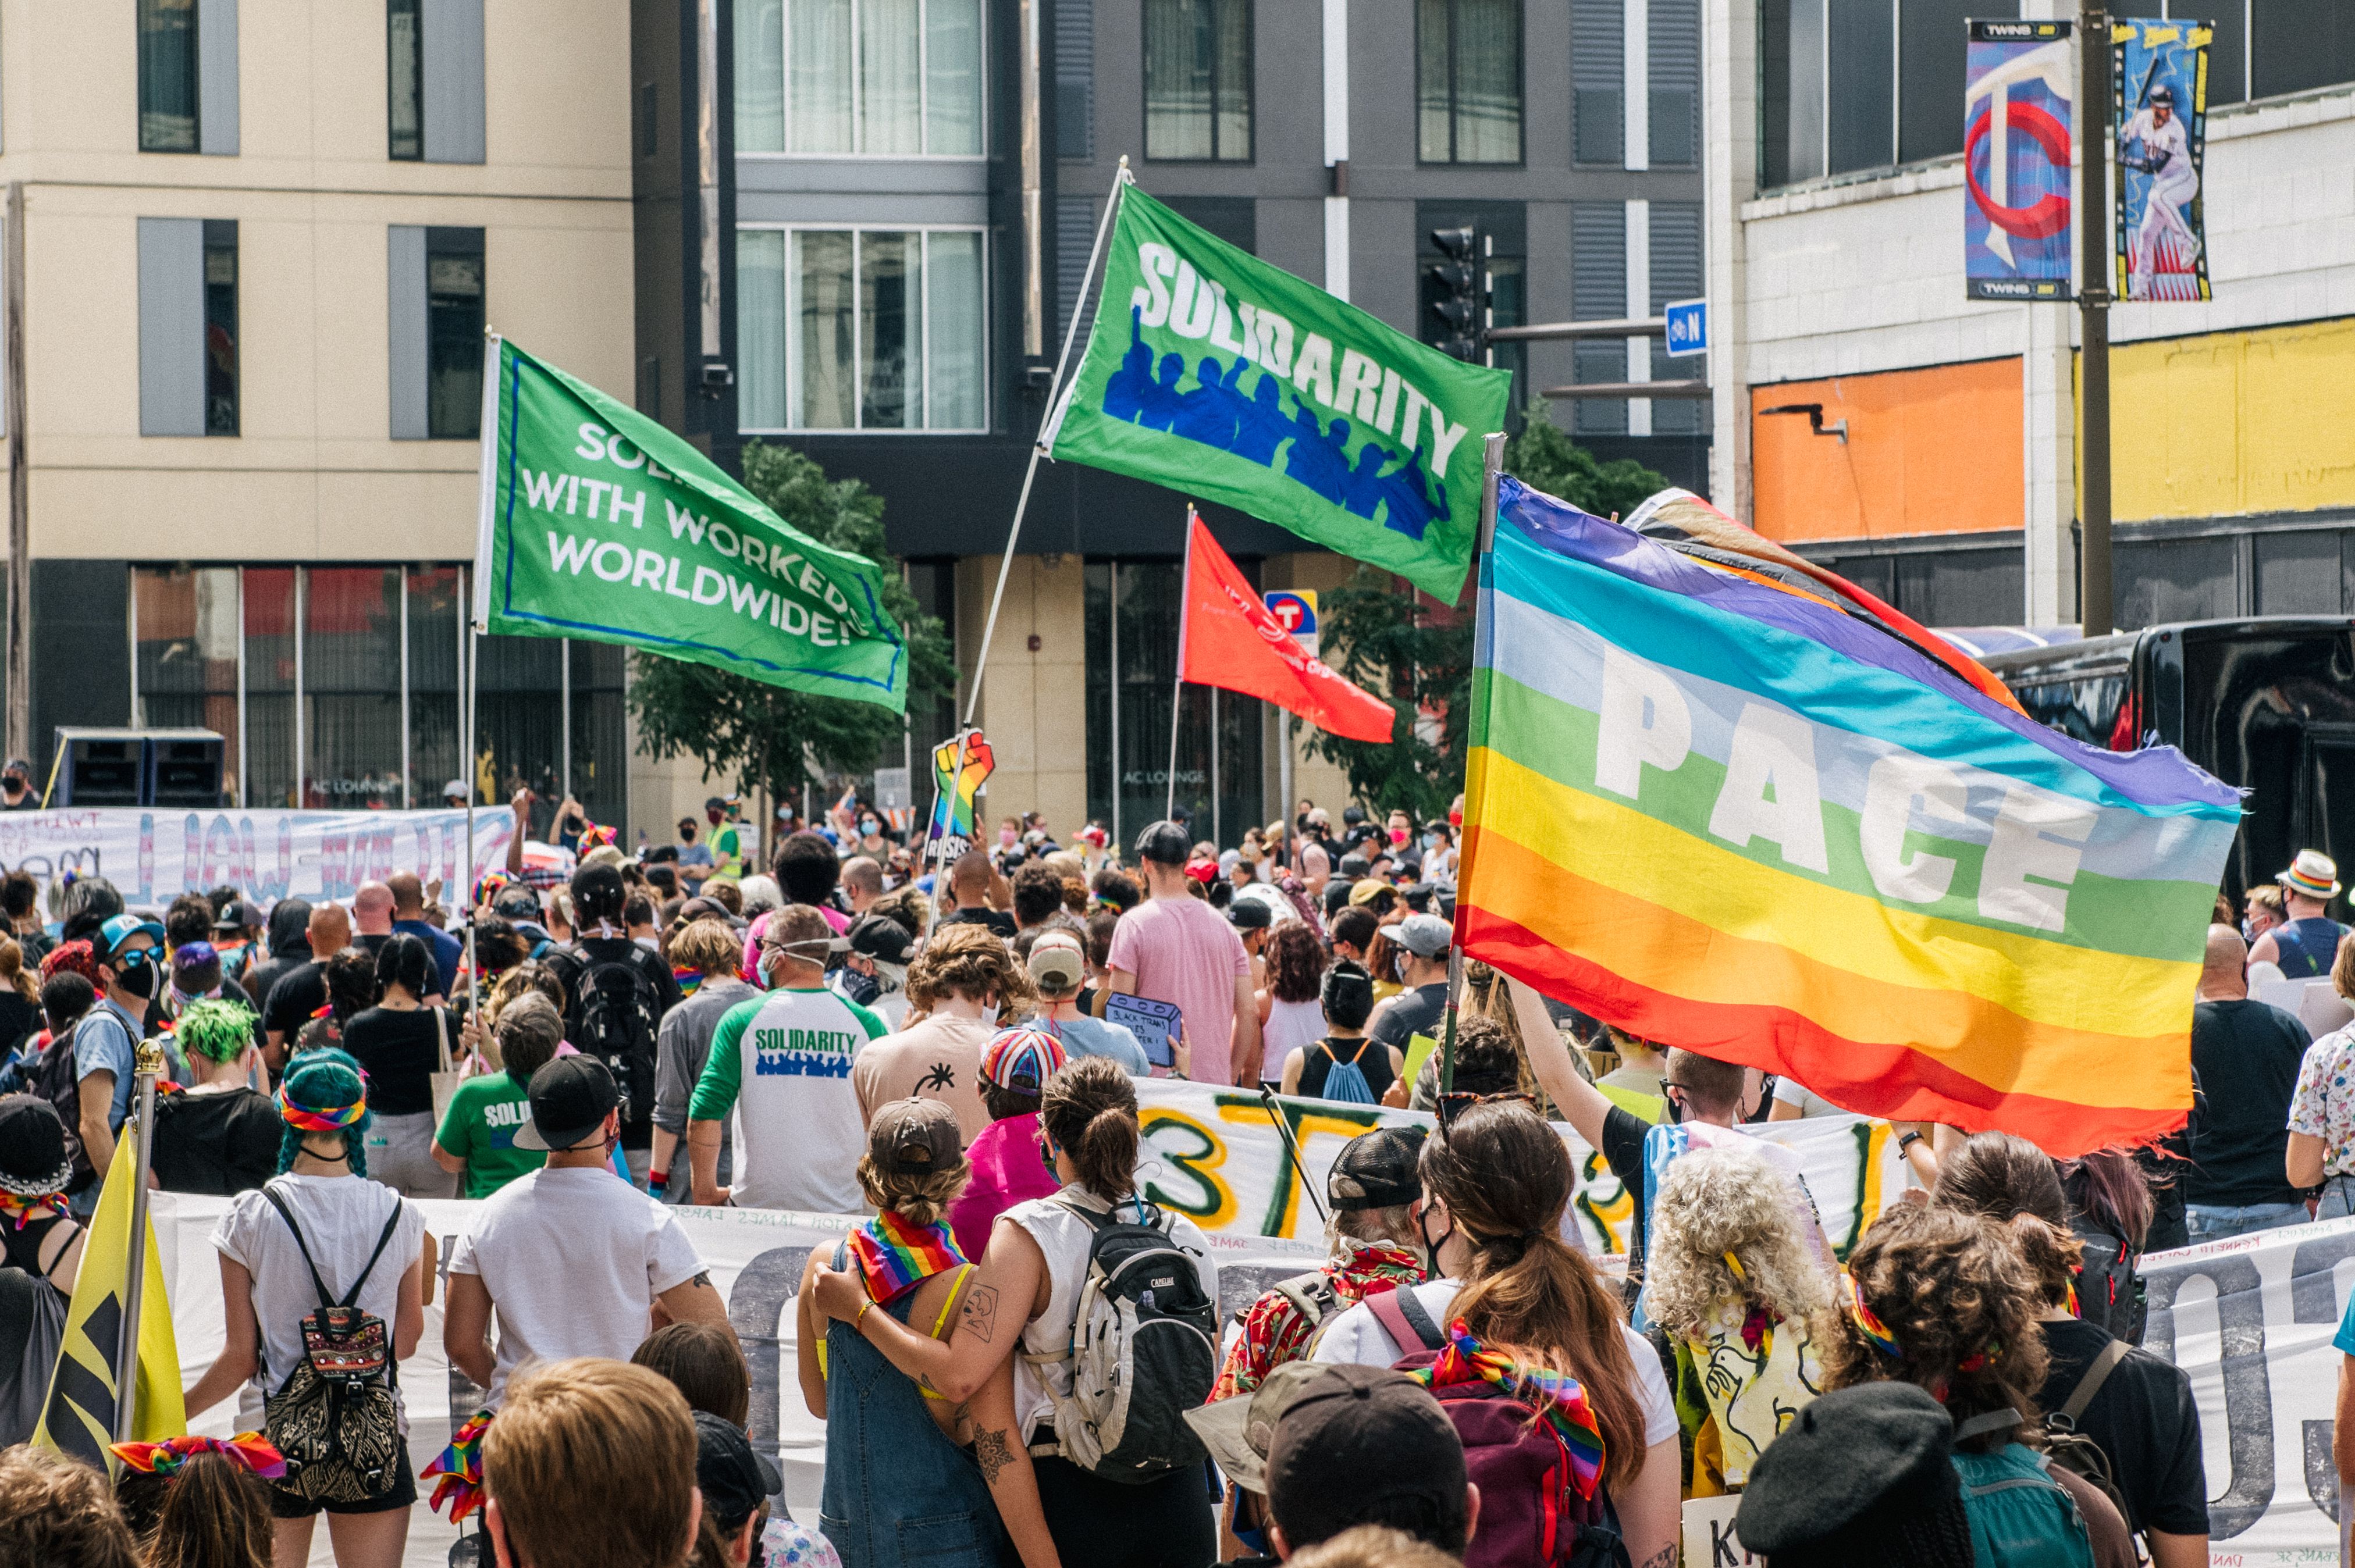  People gathered in front of the Minneapolis First Precinct during a Pride march on June 28, 2020 in Minneapolis, Minnesota.